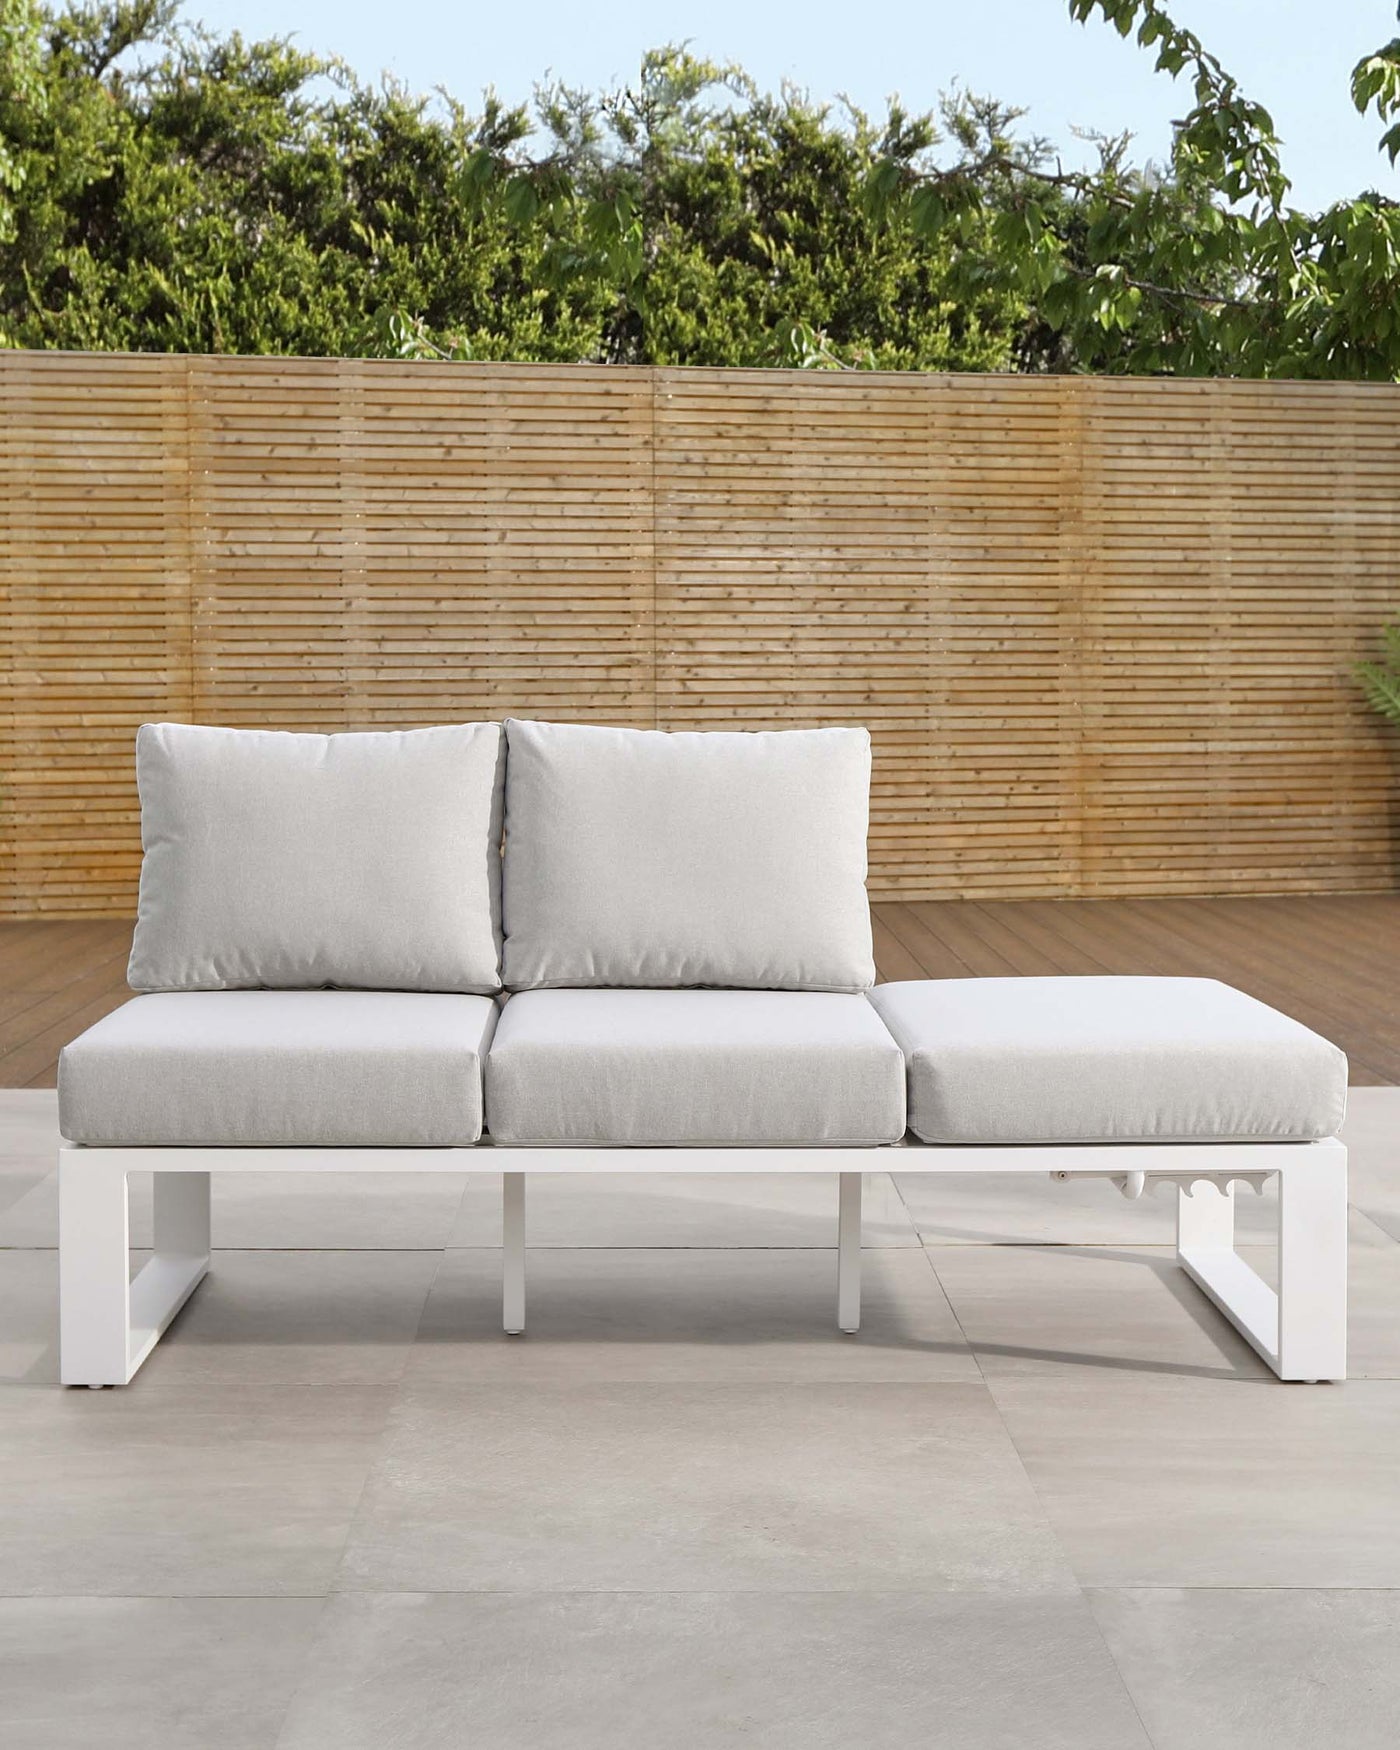 Modern white outdoor sectional sofa with light grey cushions on a patio.